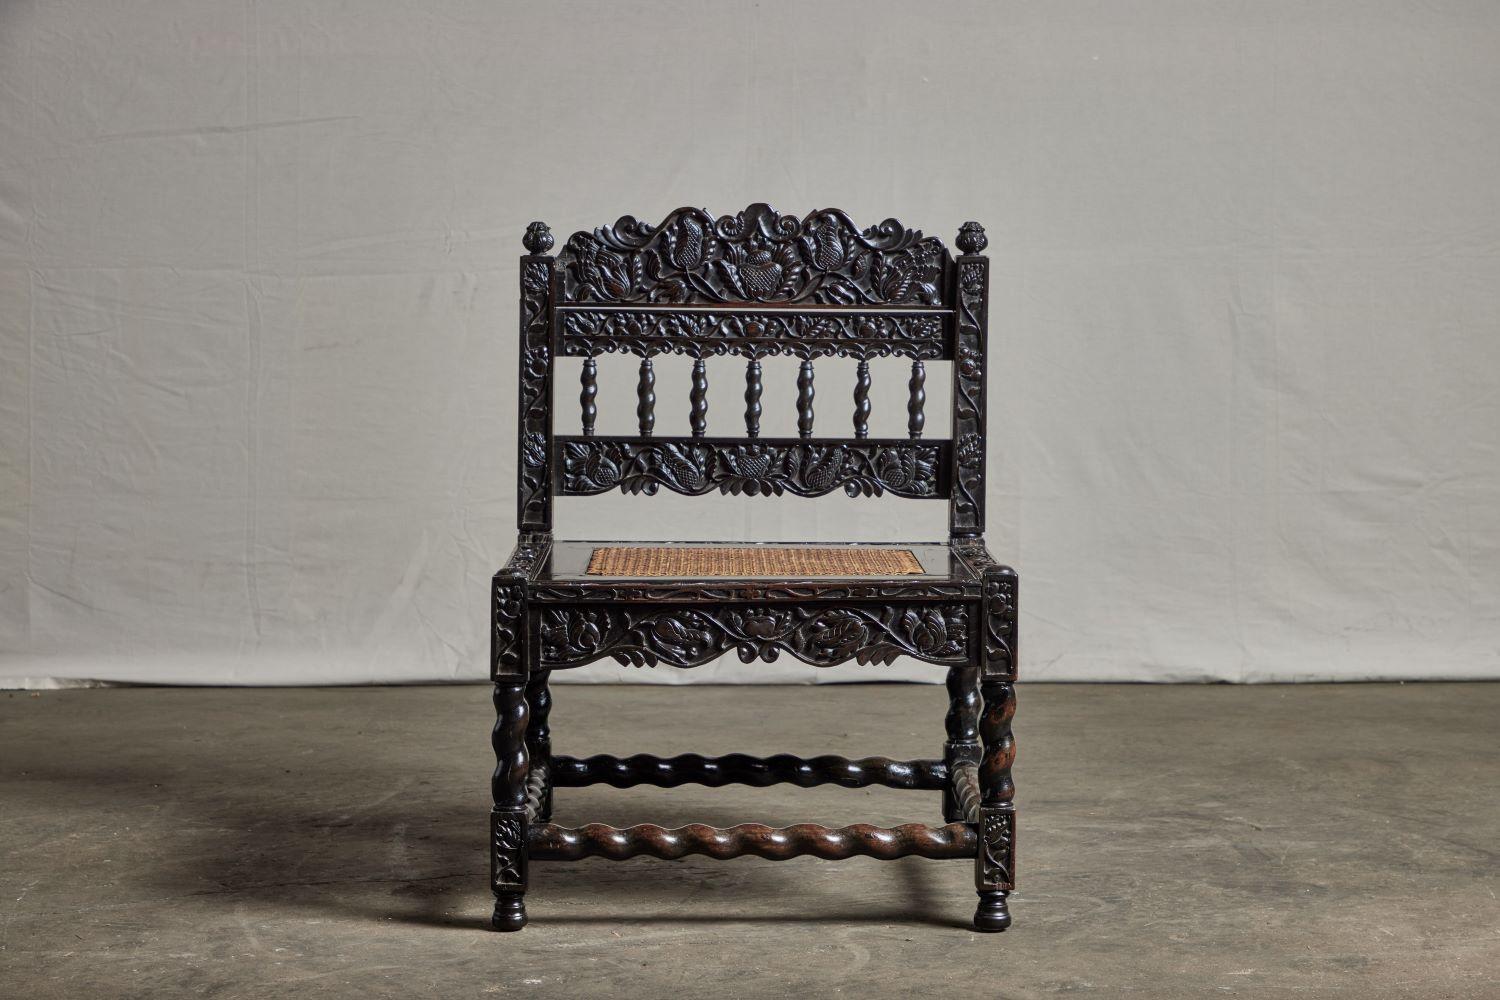 Dutch Colonial Ebony side chairs from the late 17th/early 18th century.